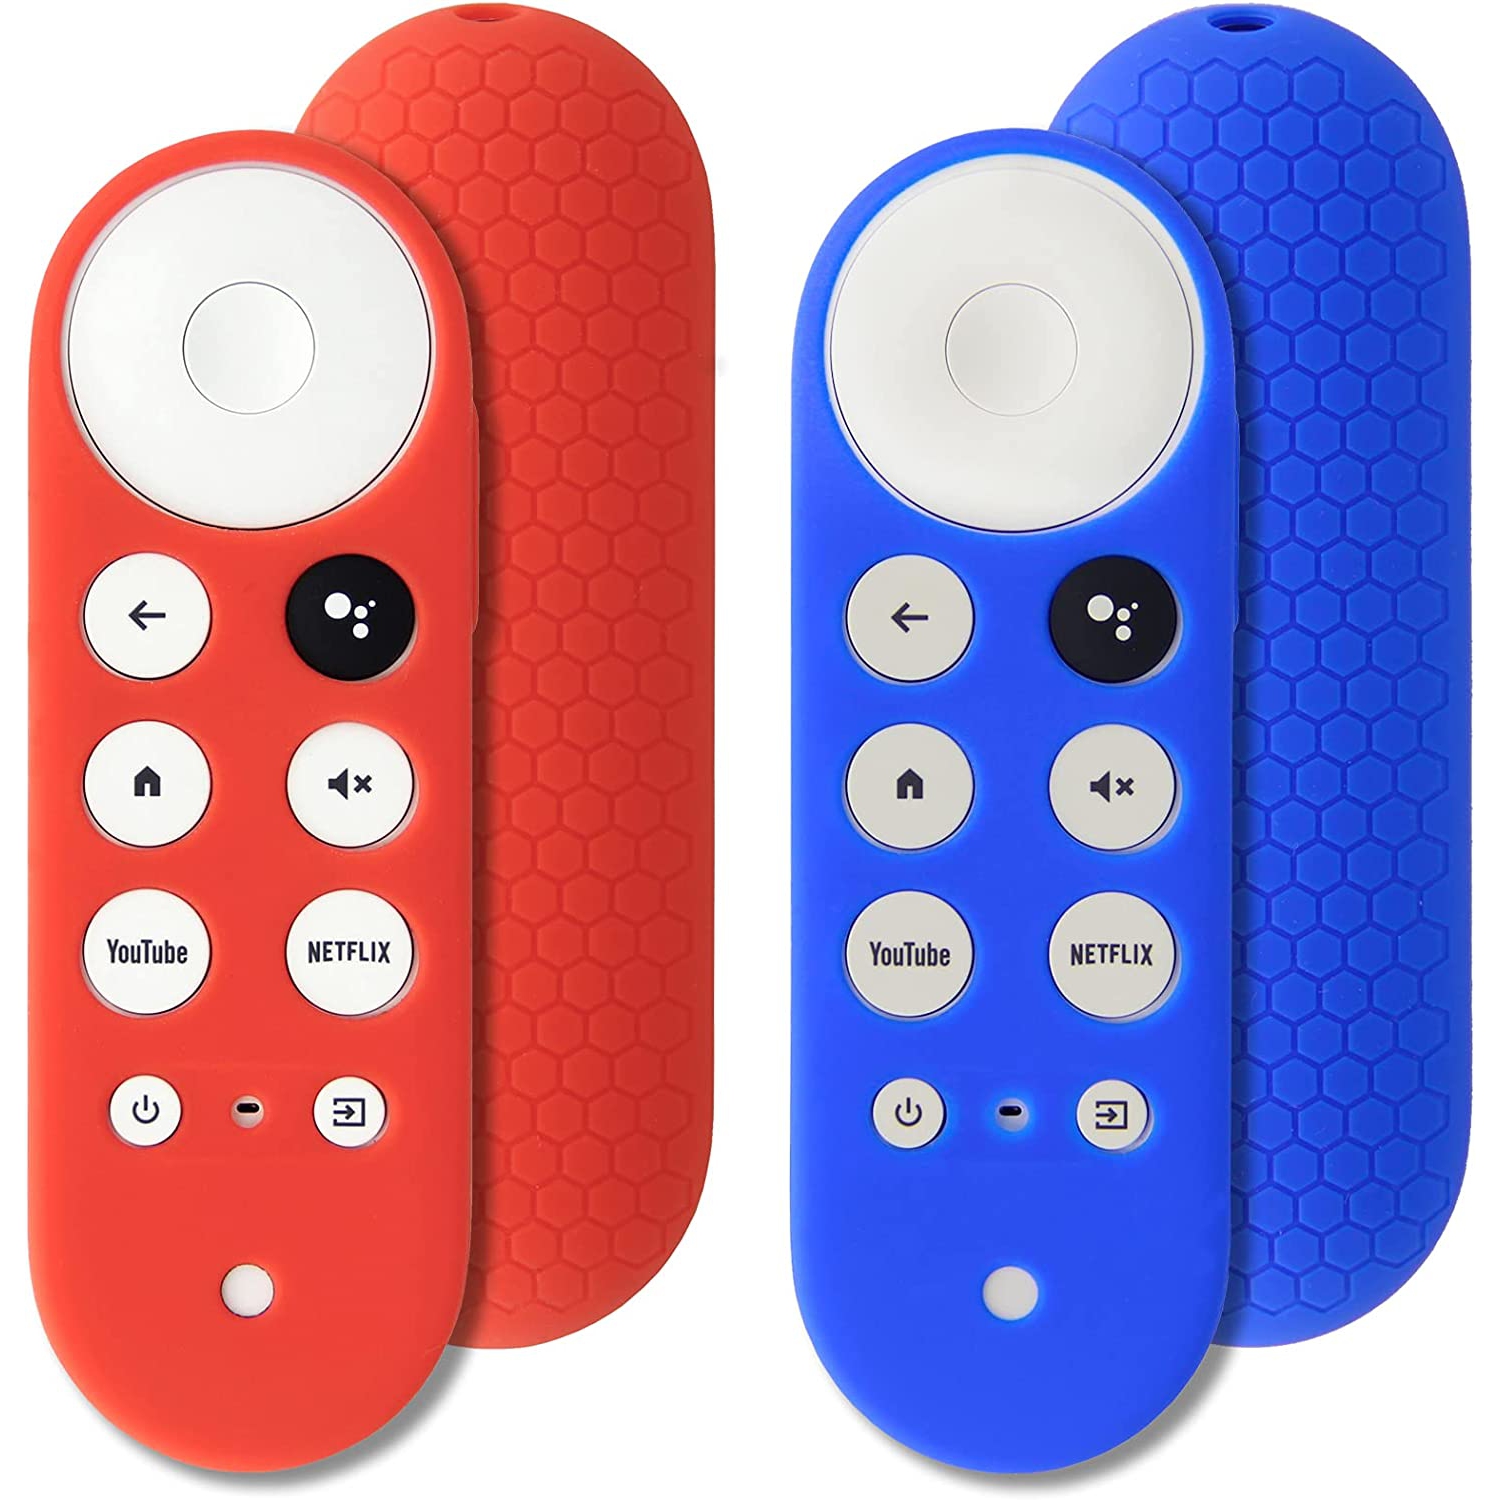 2pcs Protective Covers Compatible for Chromecast with Google TV Voice Remote, Pinowu Anti Slip Remote Case for 2020 Google Remote Control (Blue & Red)